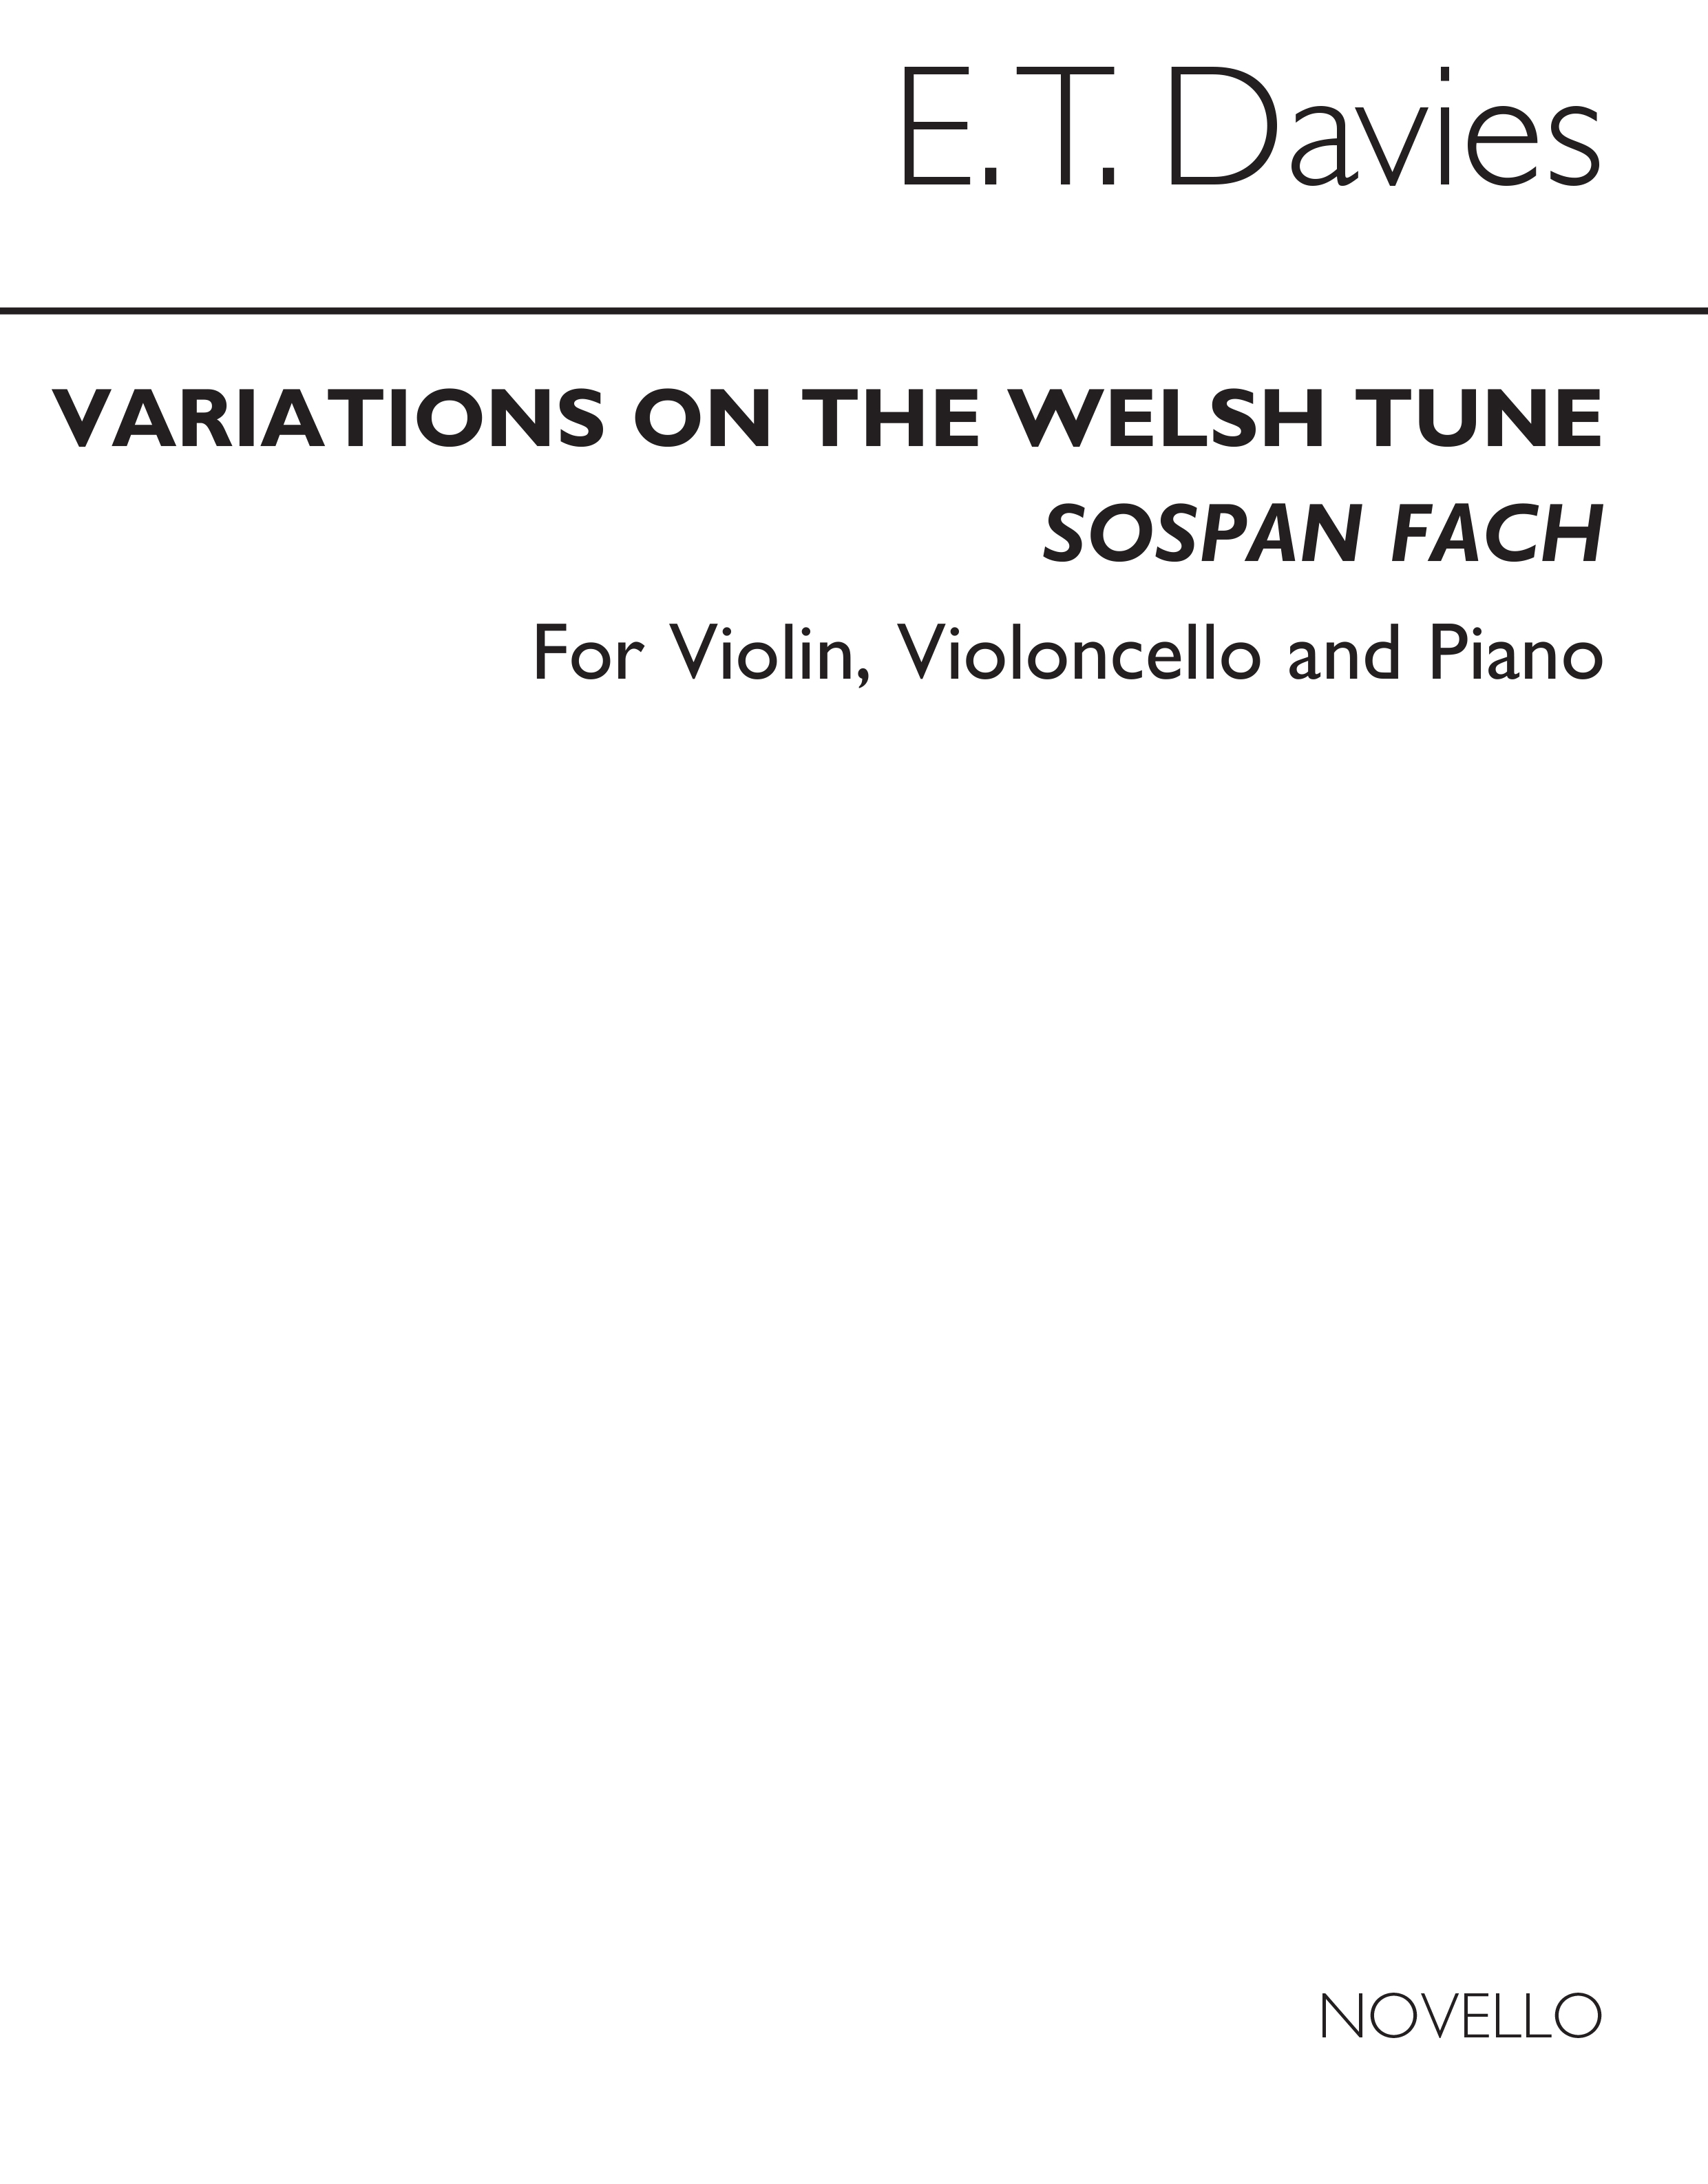 E.T. Davies: Variations On A Welsh Tune for Piano Trio (Score and Parts)